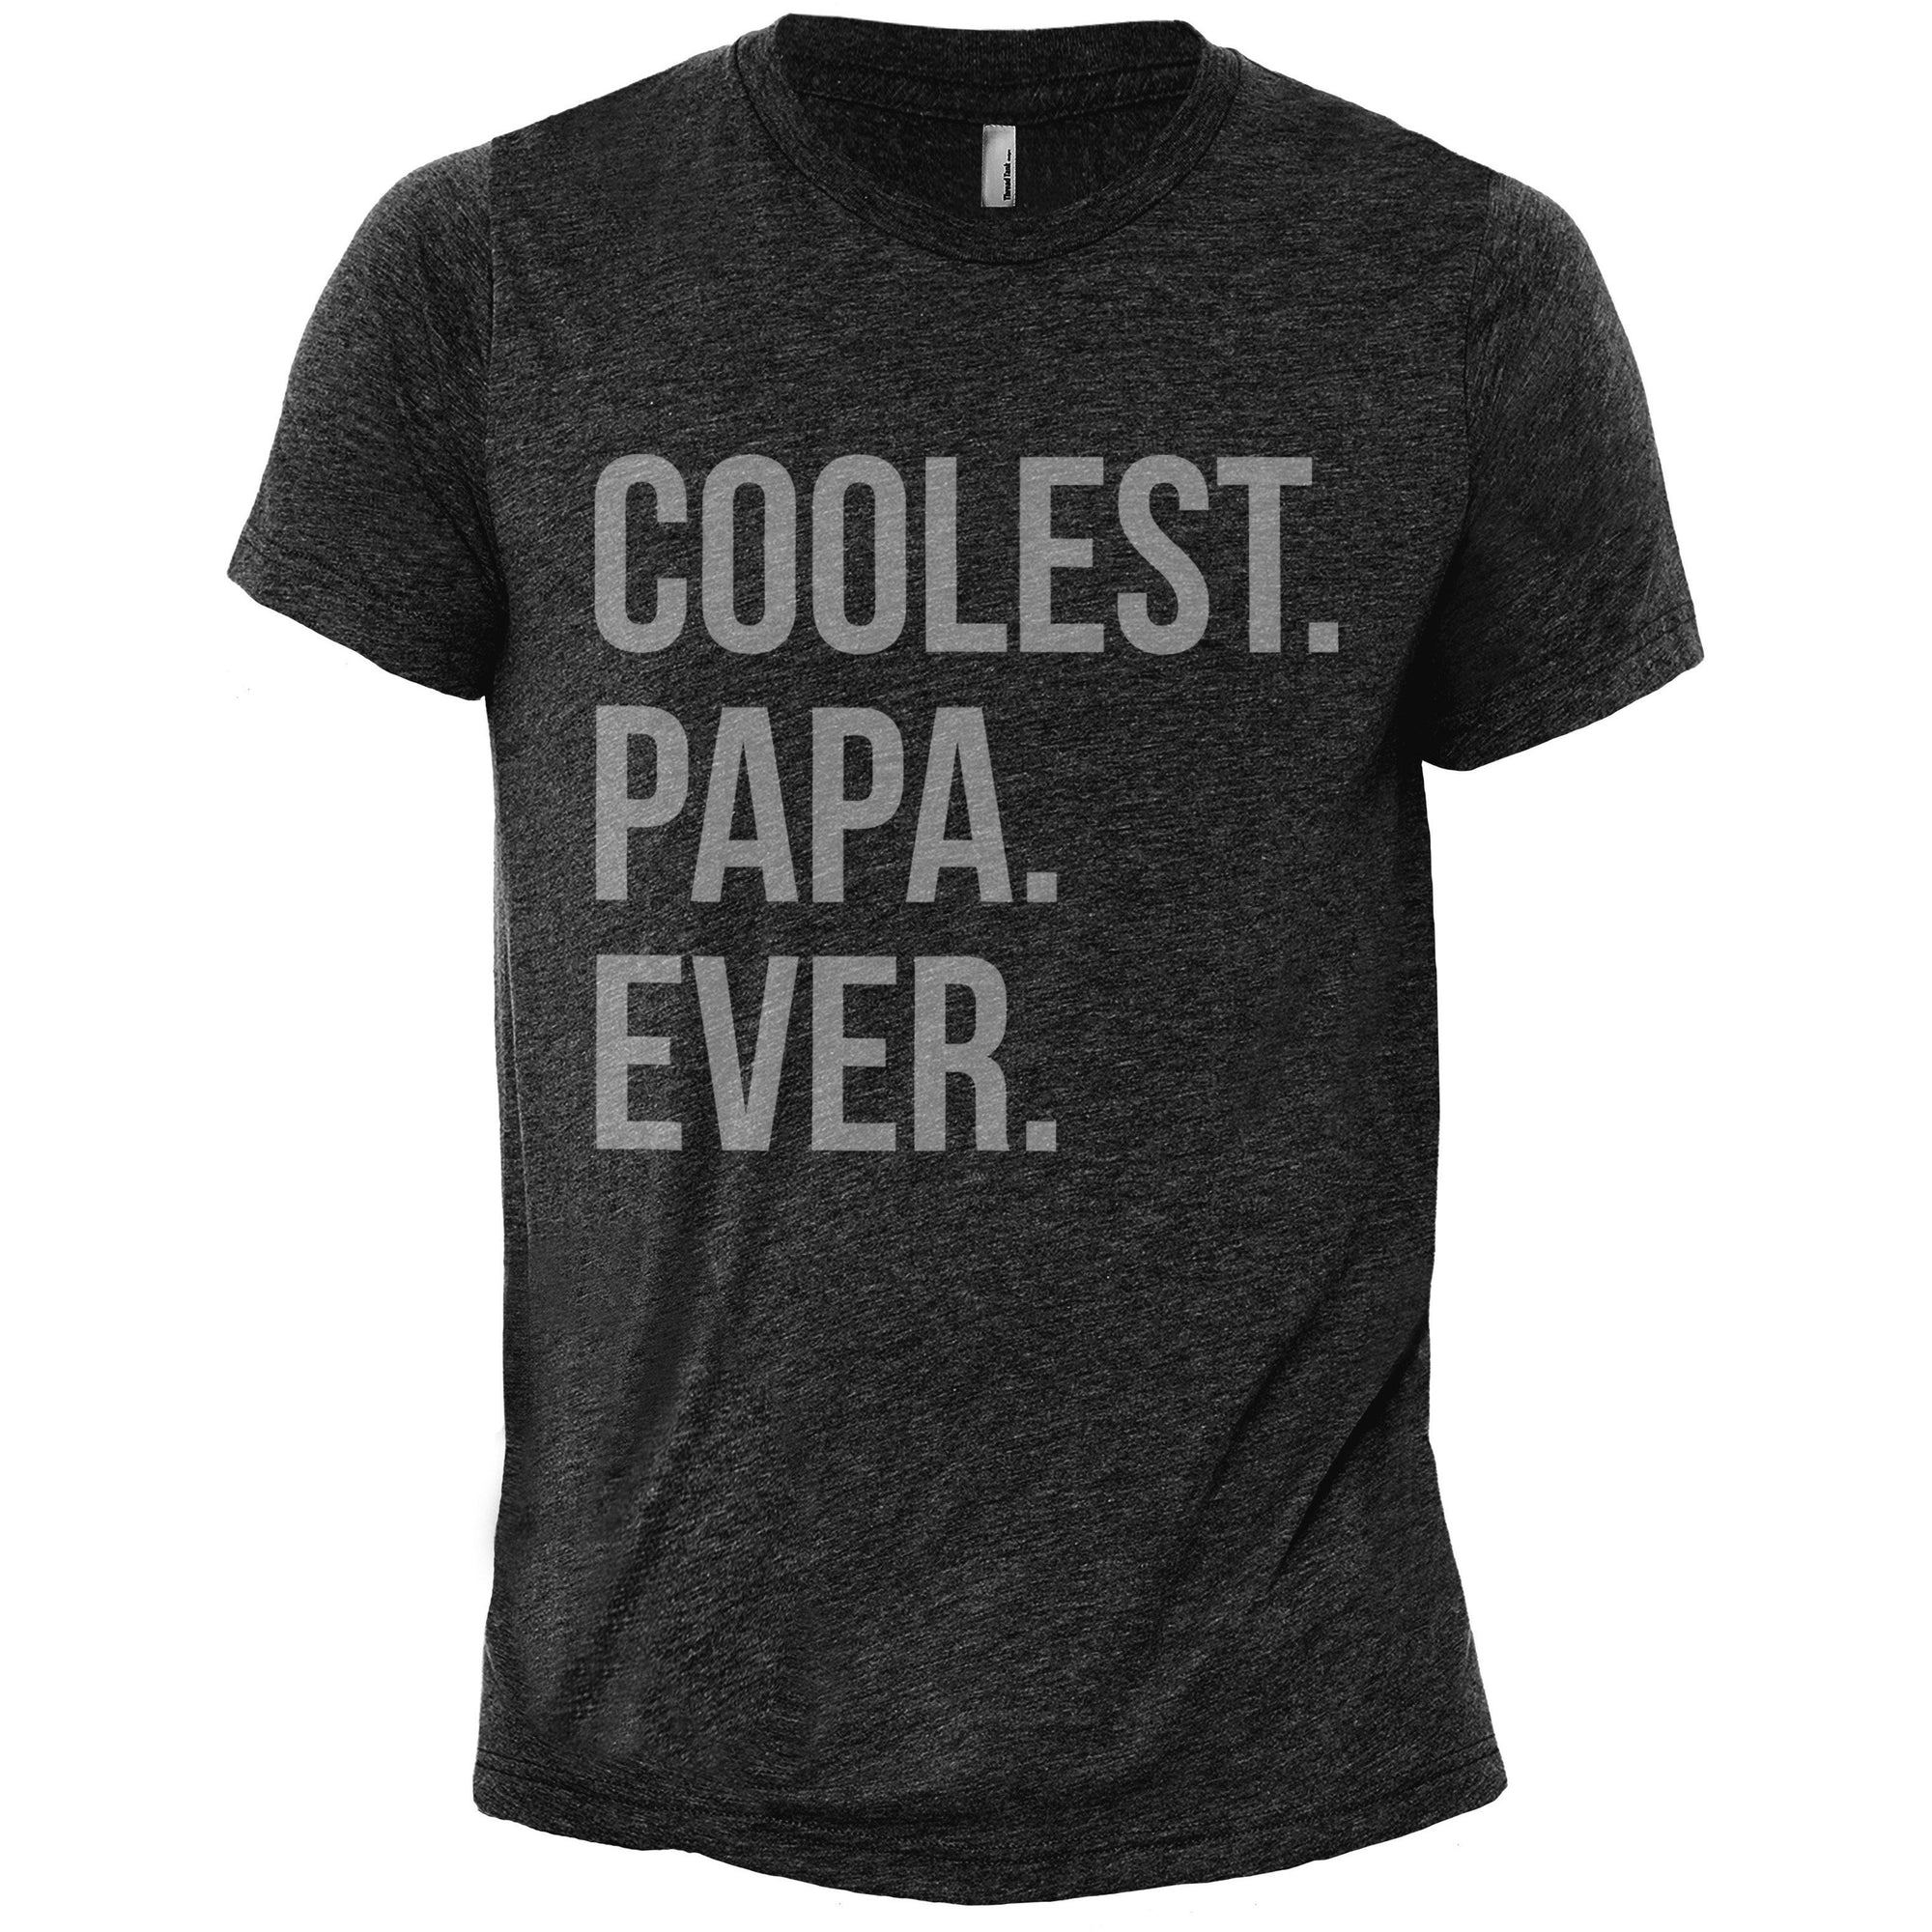 Coolest Papa Ever Heather Grey Printed Graphic Men's Crew T-Shirt Tee